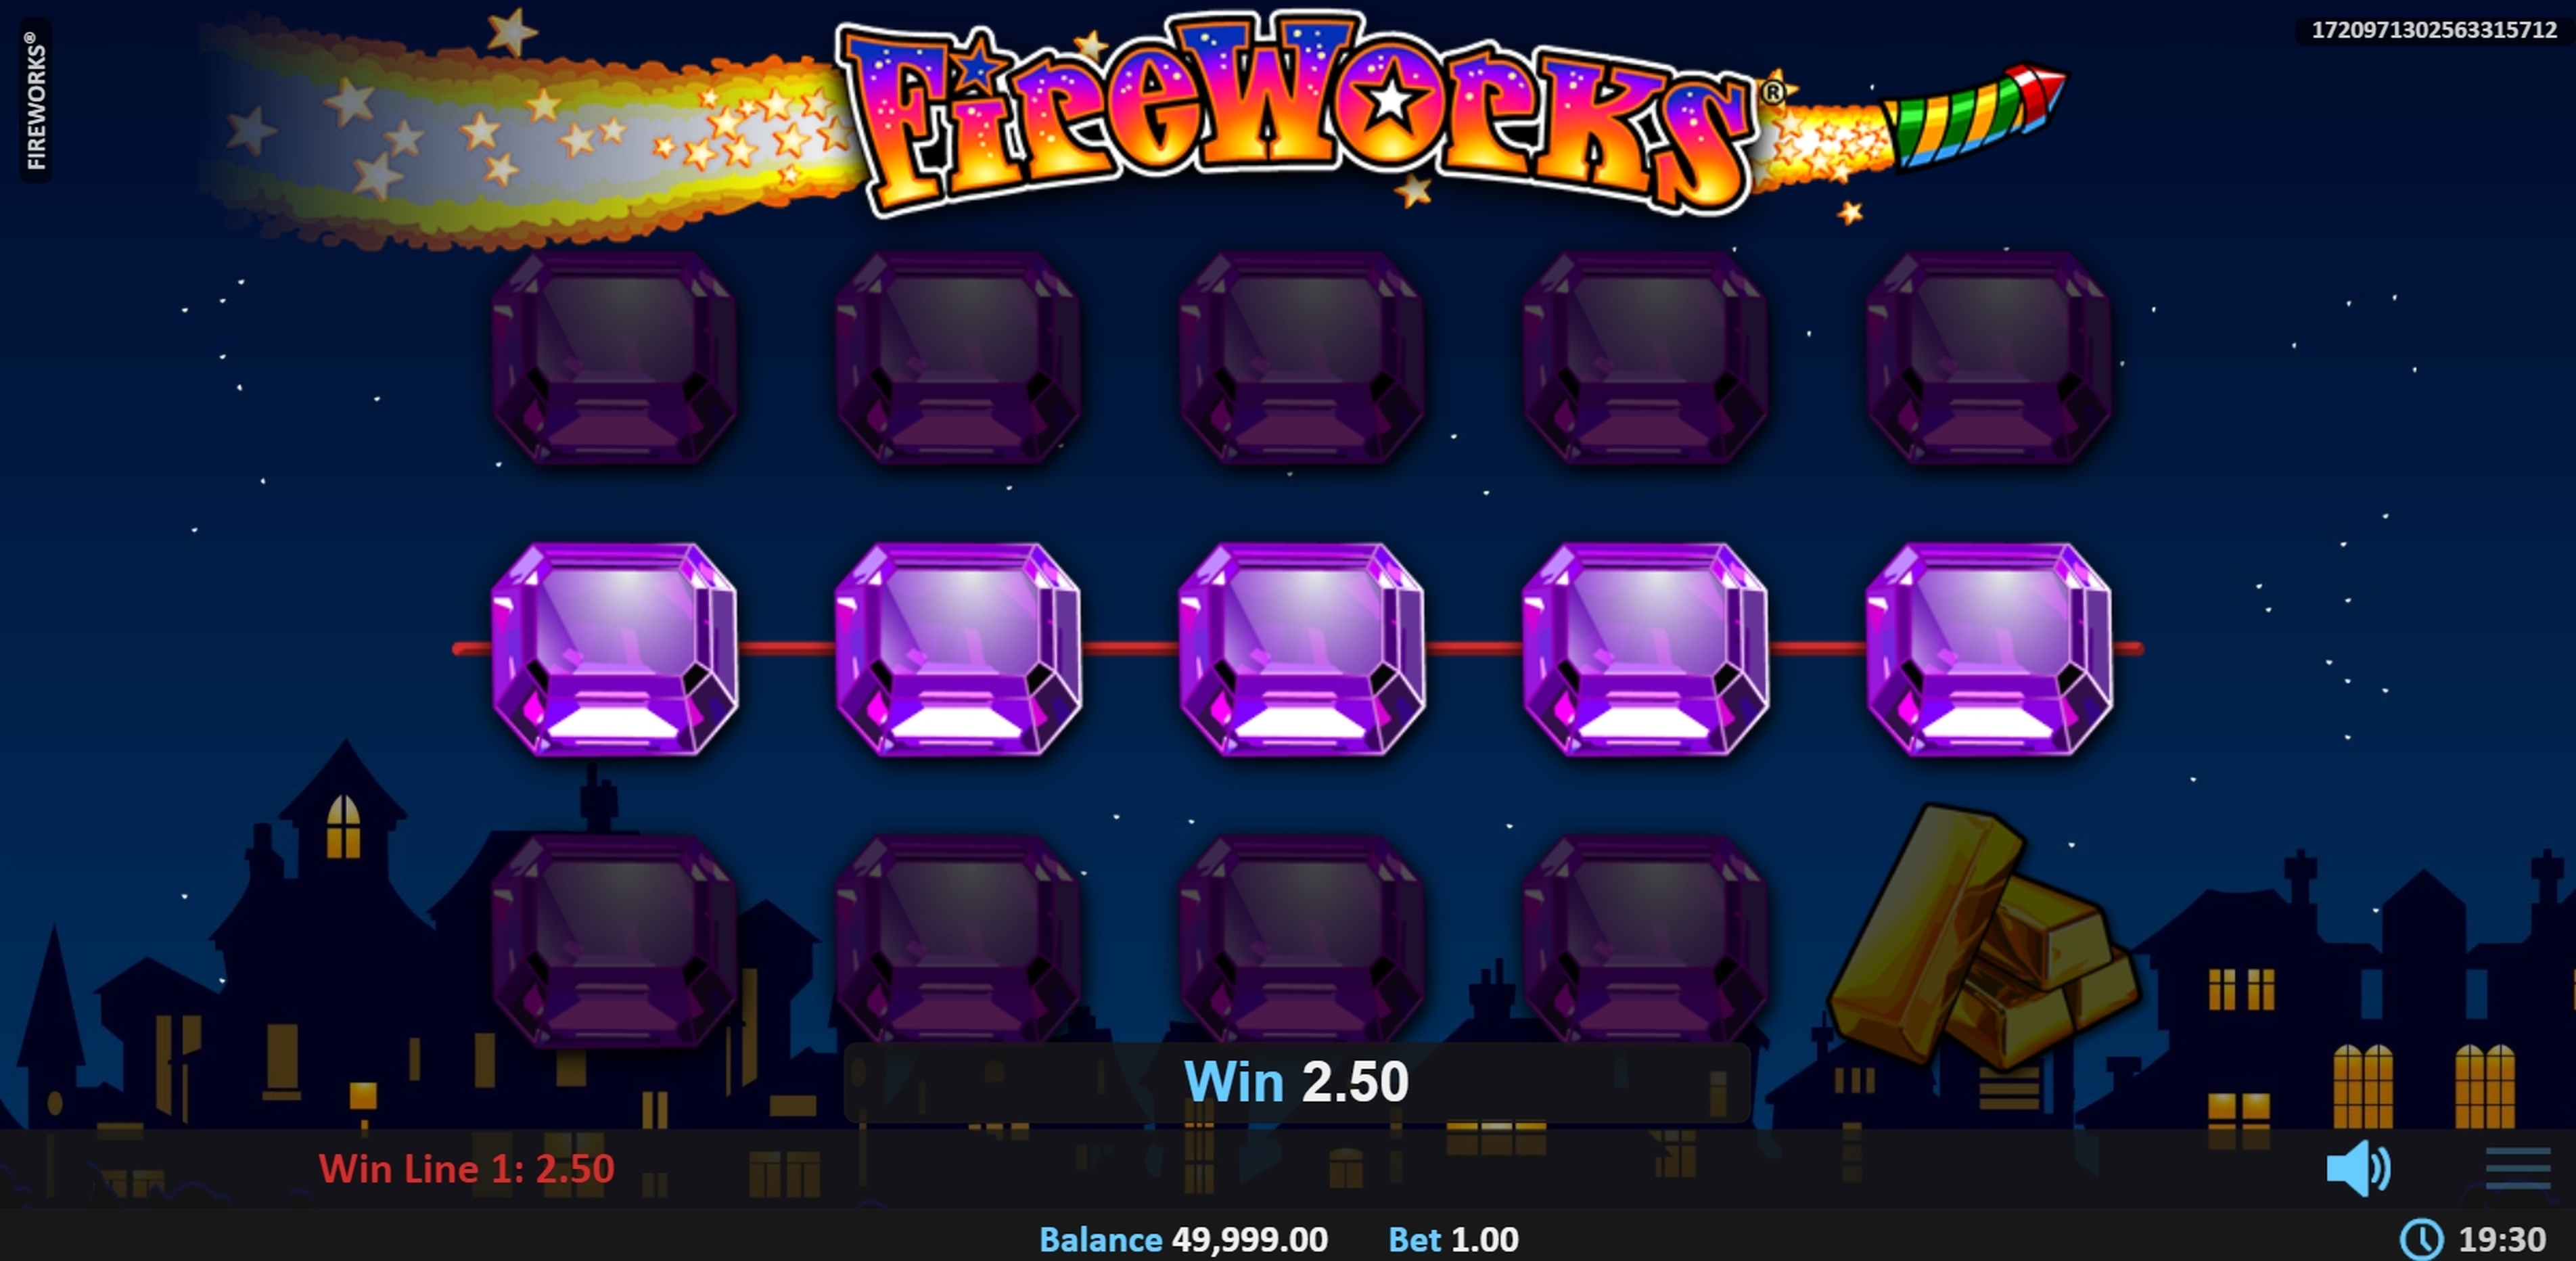 Win Money in Fireworks Free Slot Game by Realistic Games